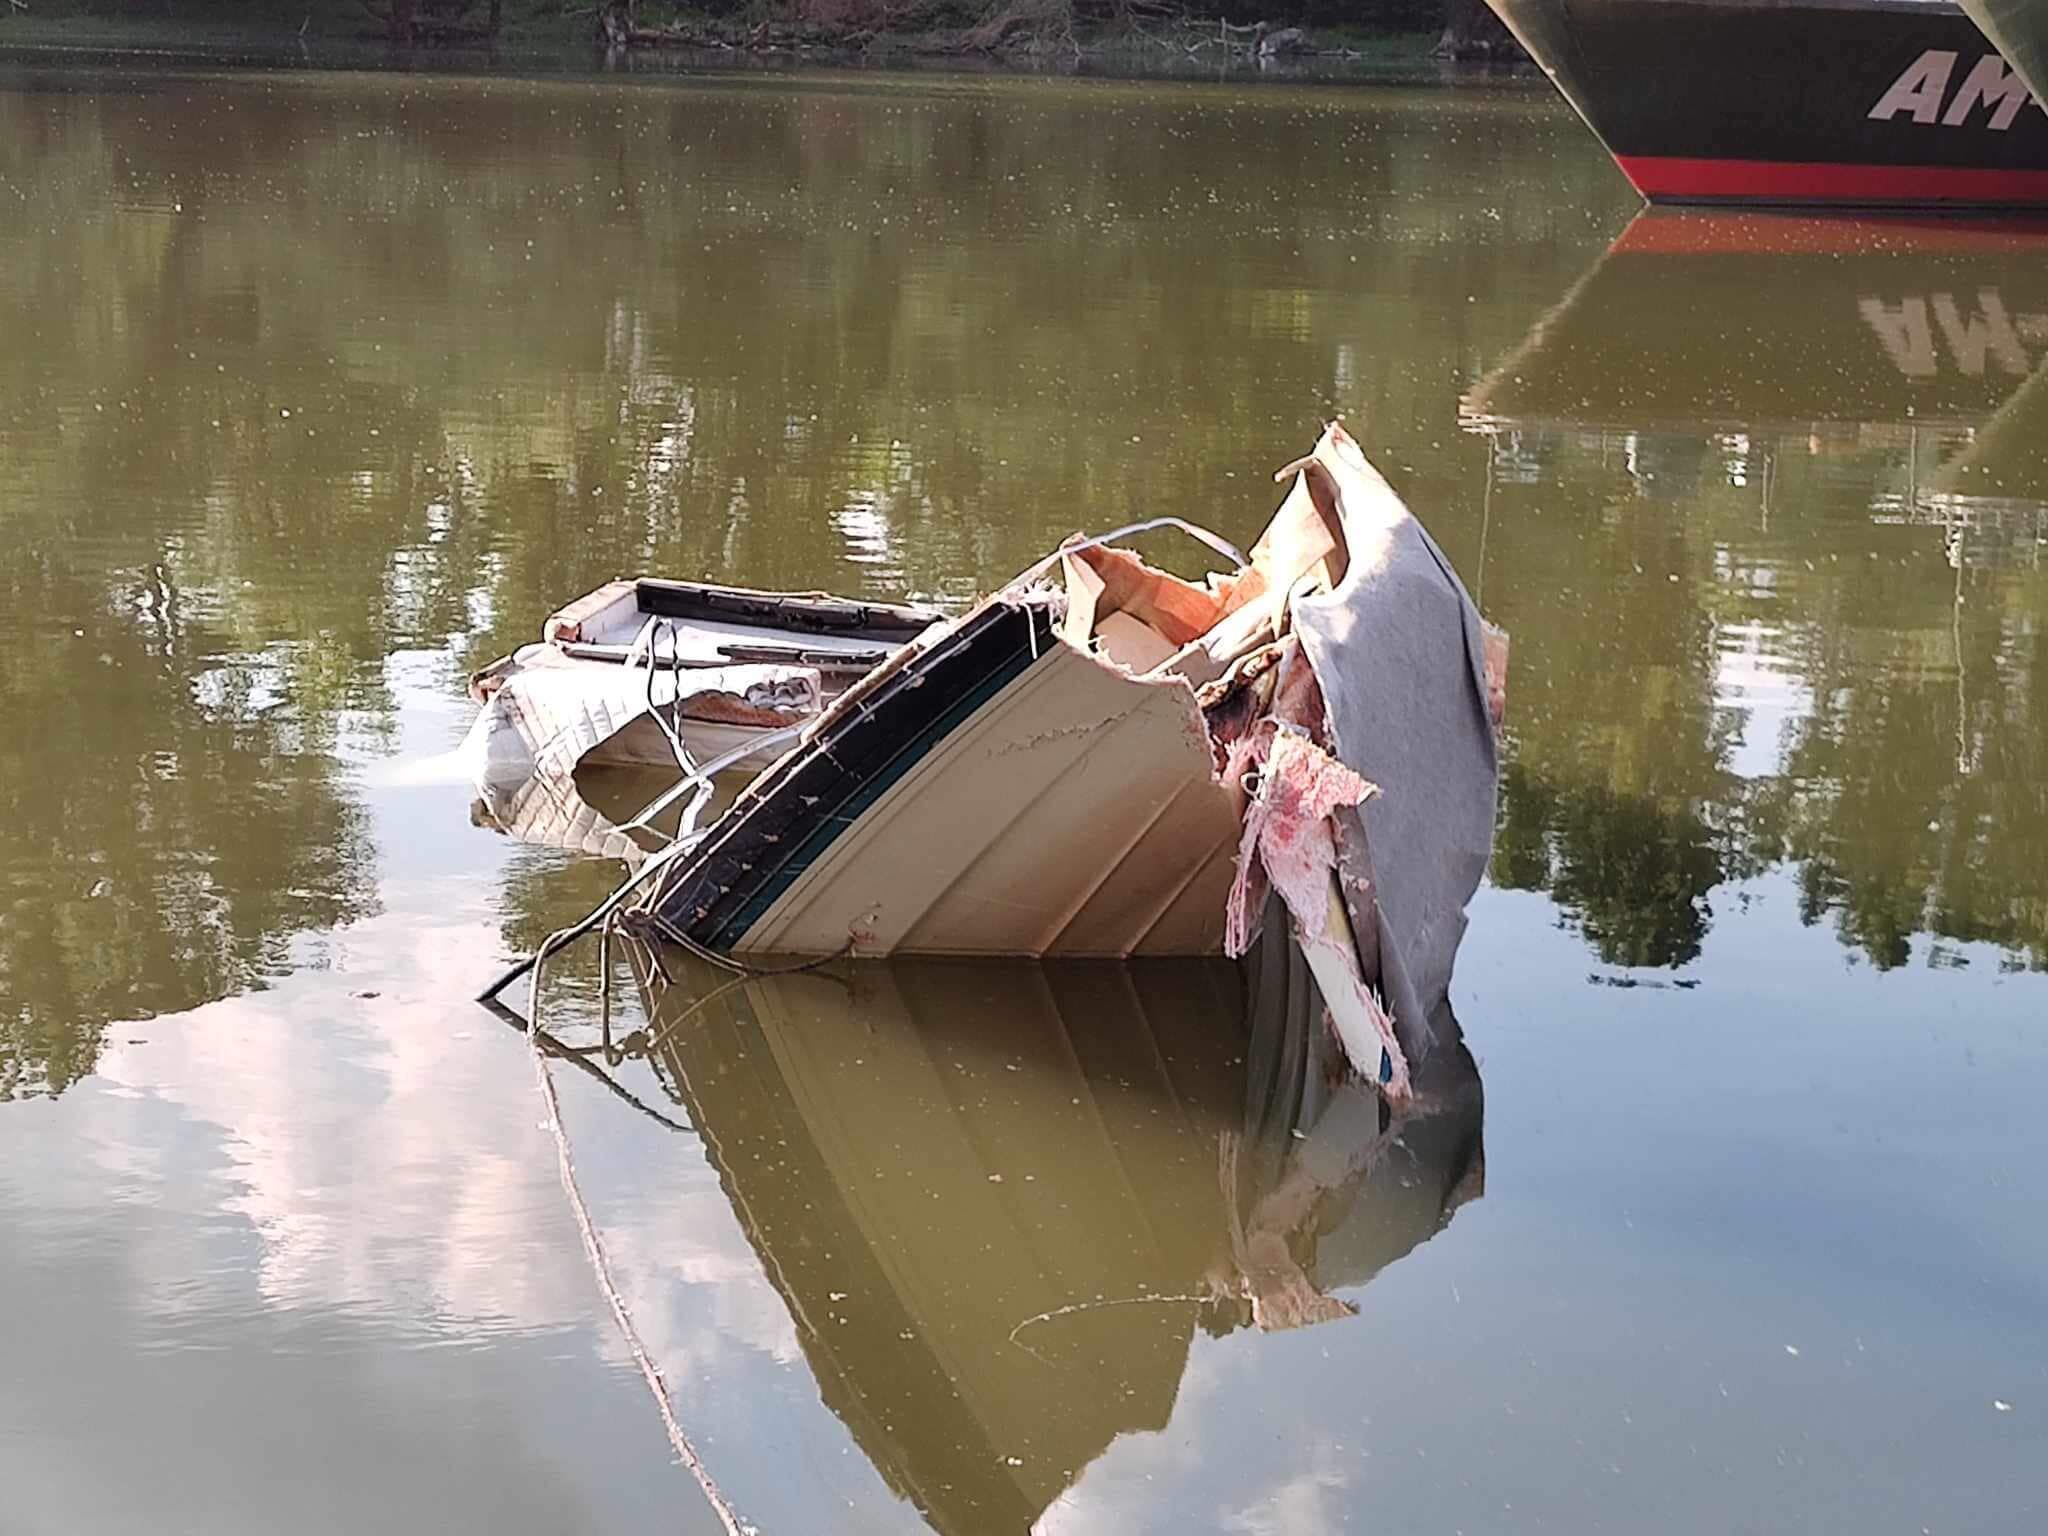 Updated:  New Danube River Boat Disaster: Body of Sixth Victim in Verőce Boat Accident Recovered